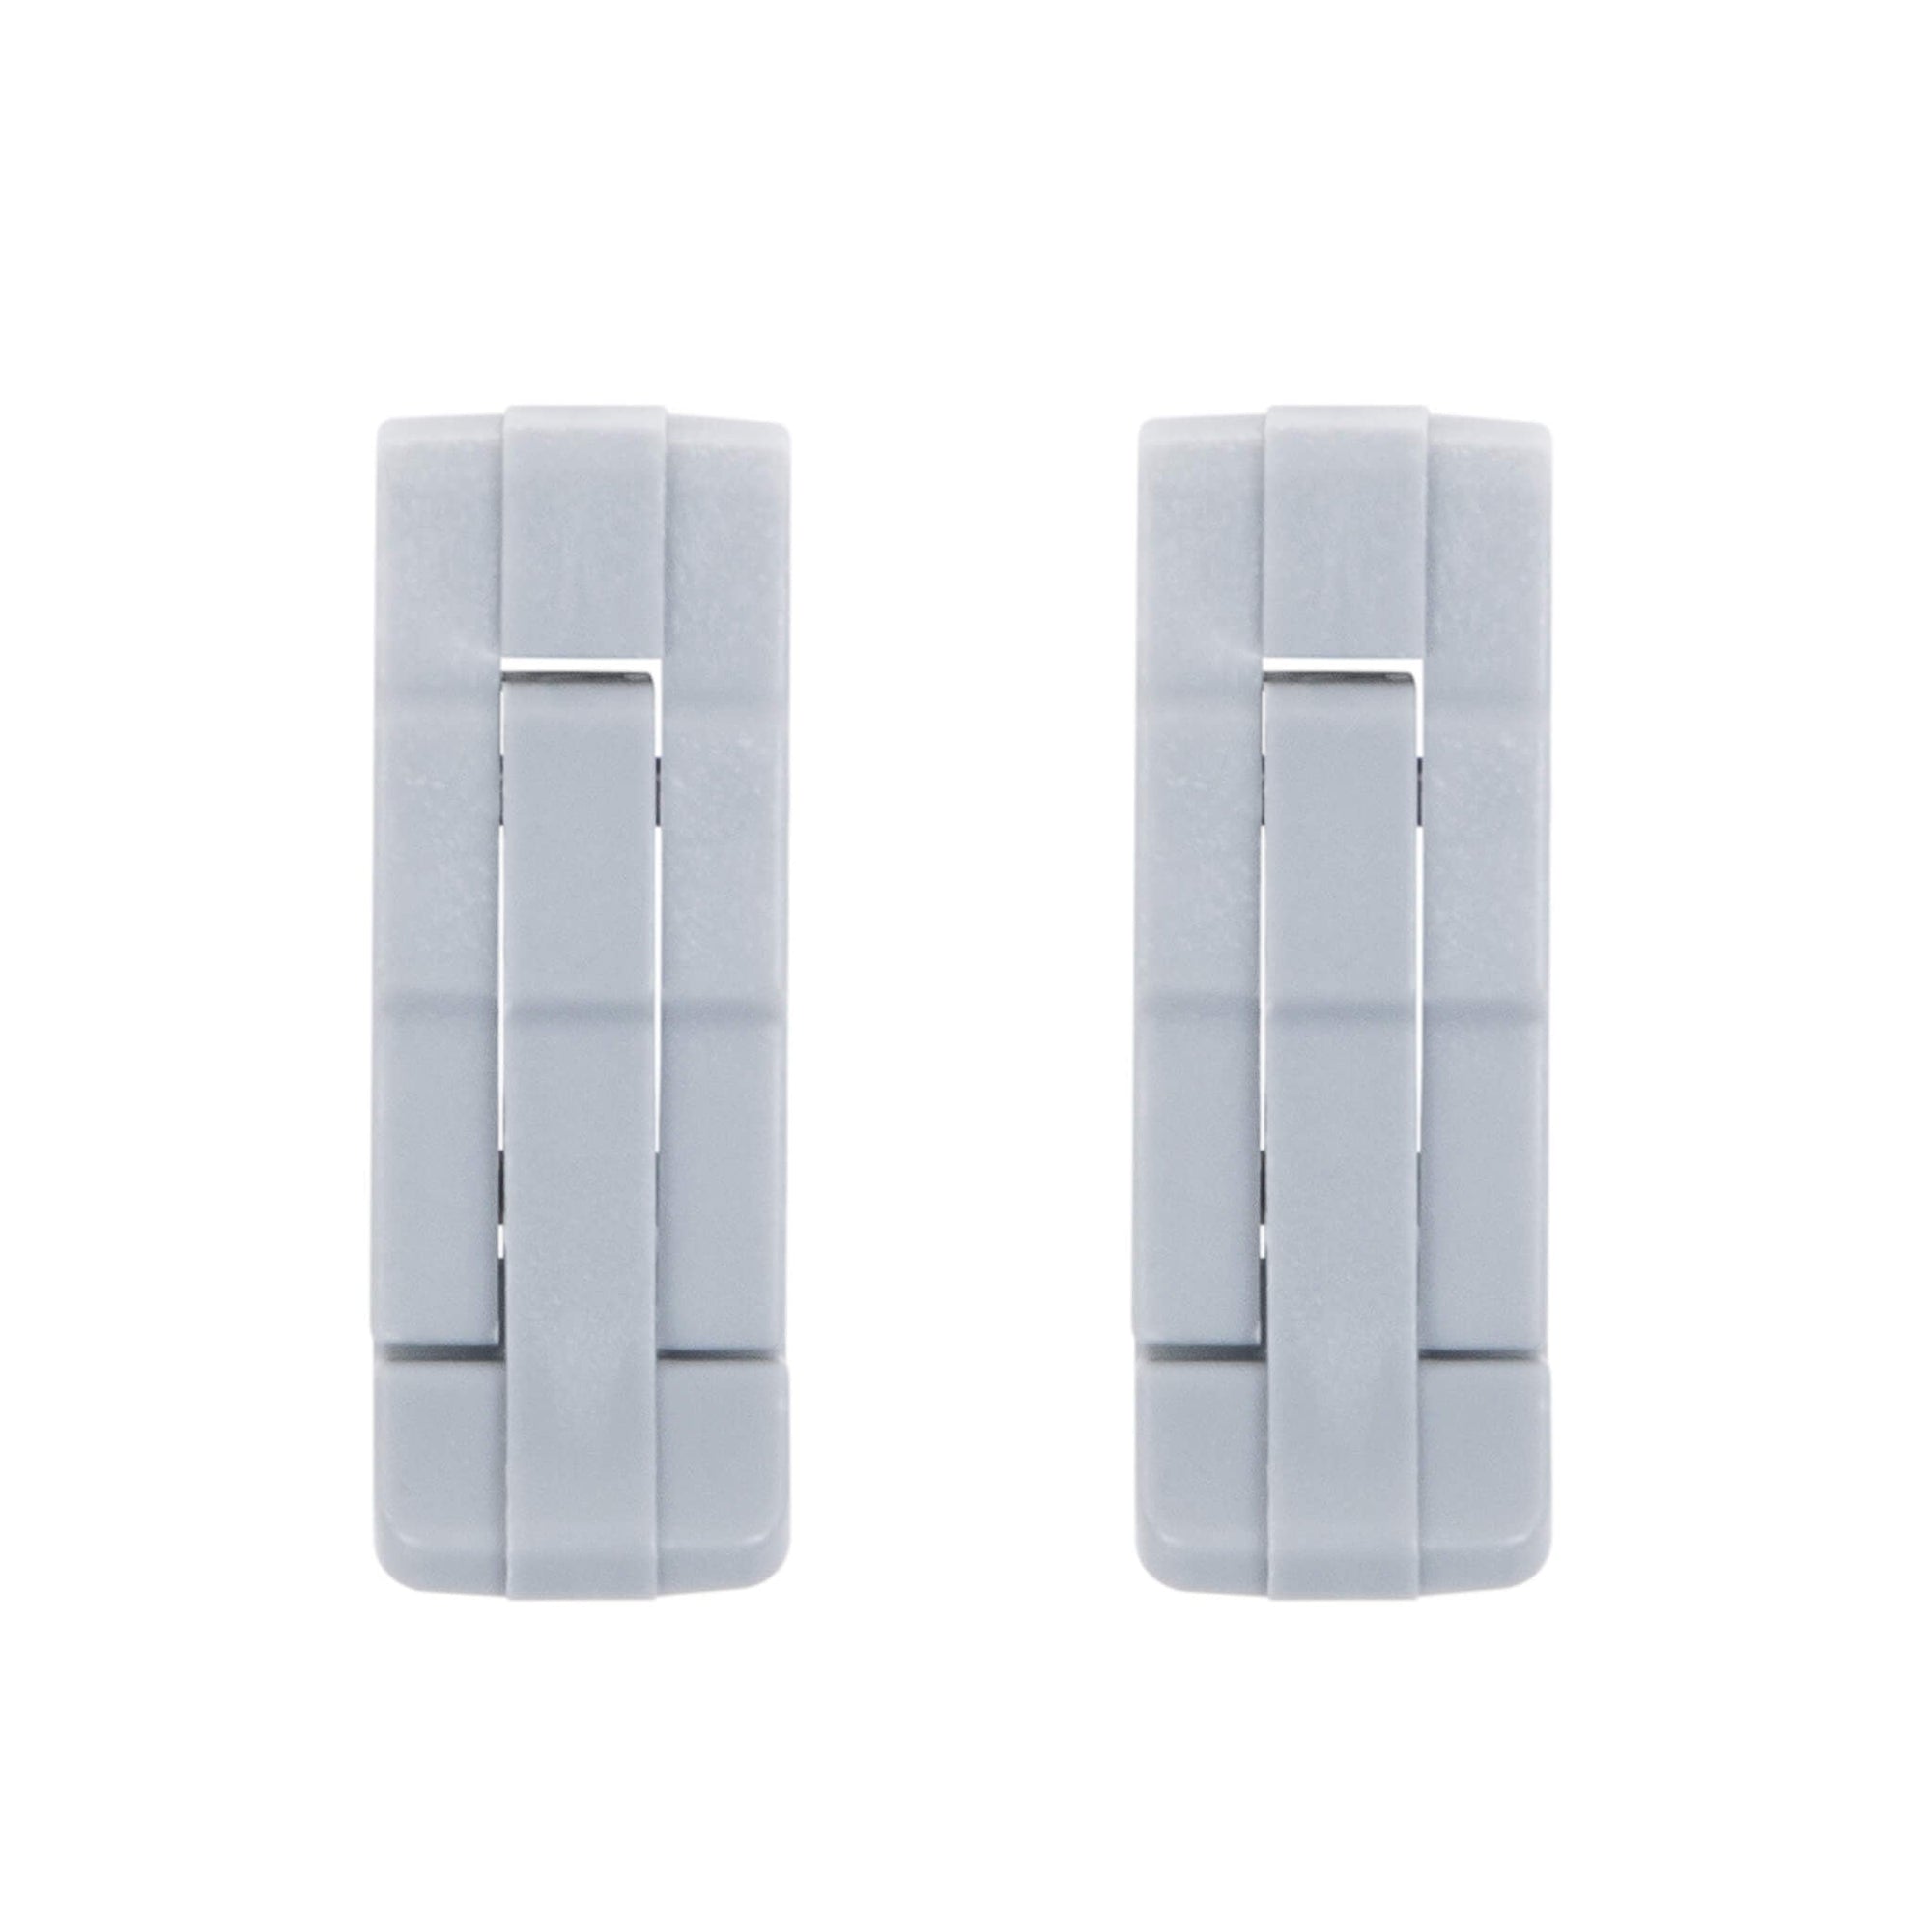 Pelican 1120 Replacement Latches, Silver (Set of 2) ColorCase 